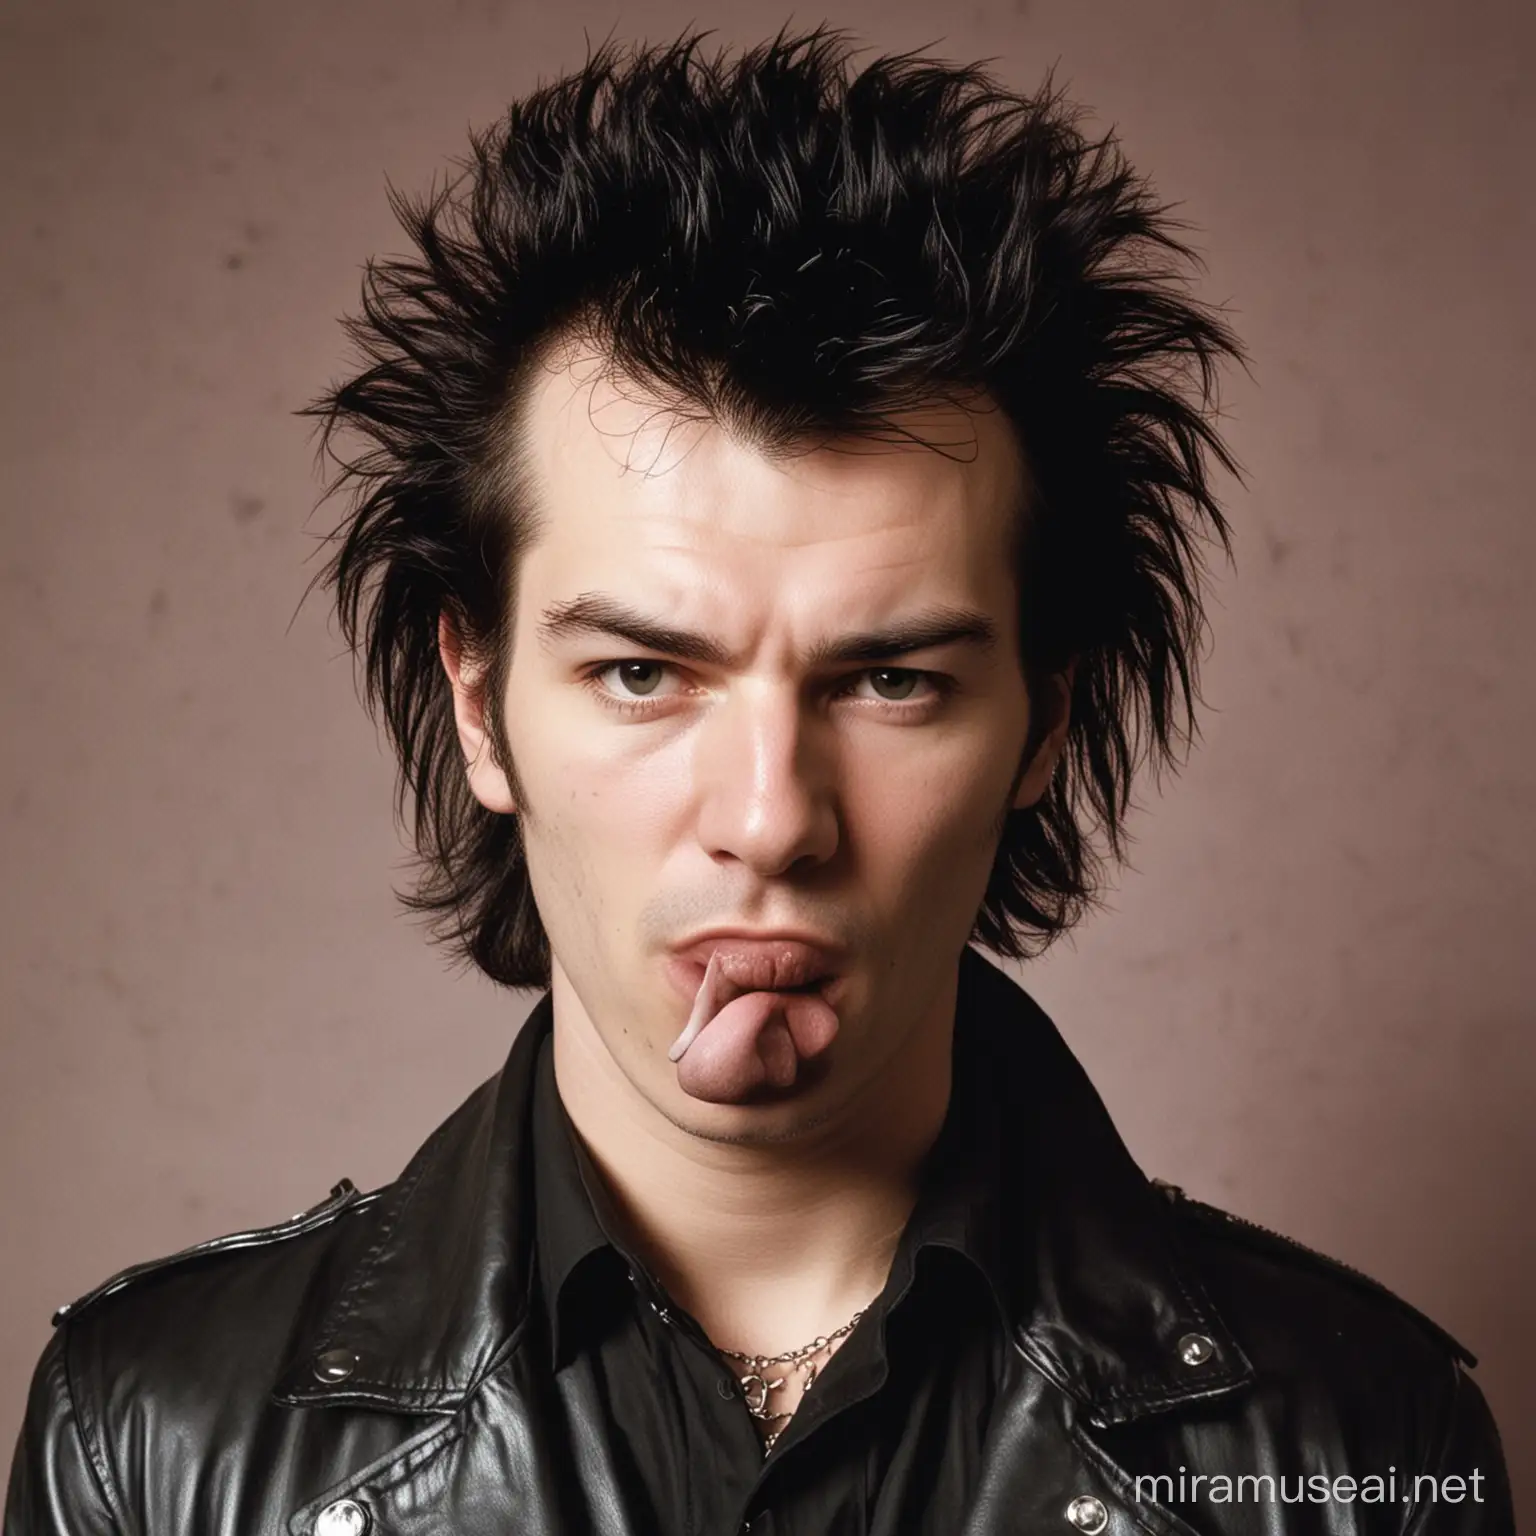 Punk Rock Legend Sid Vicious Performing Live on Stage